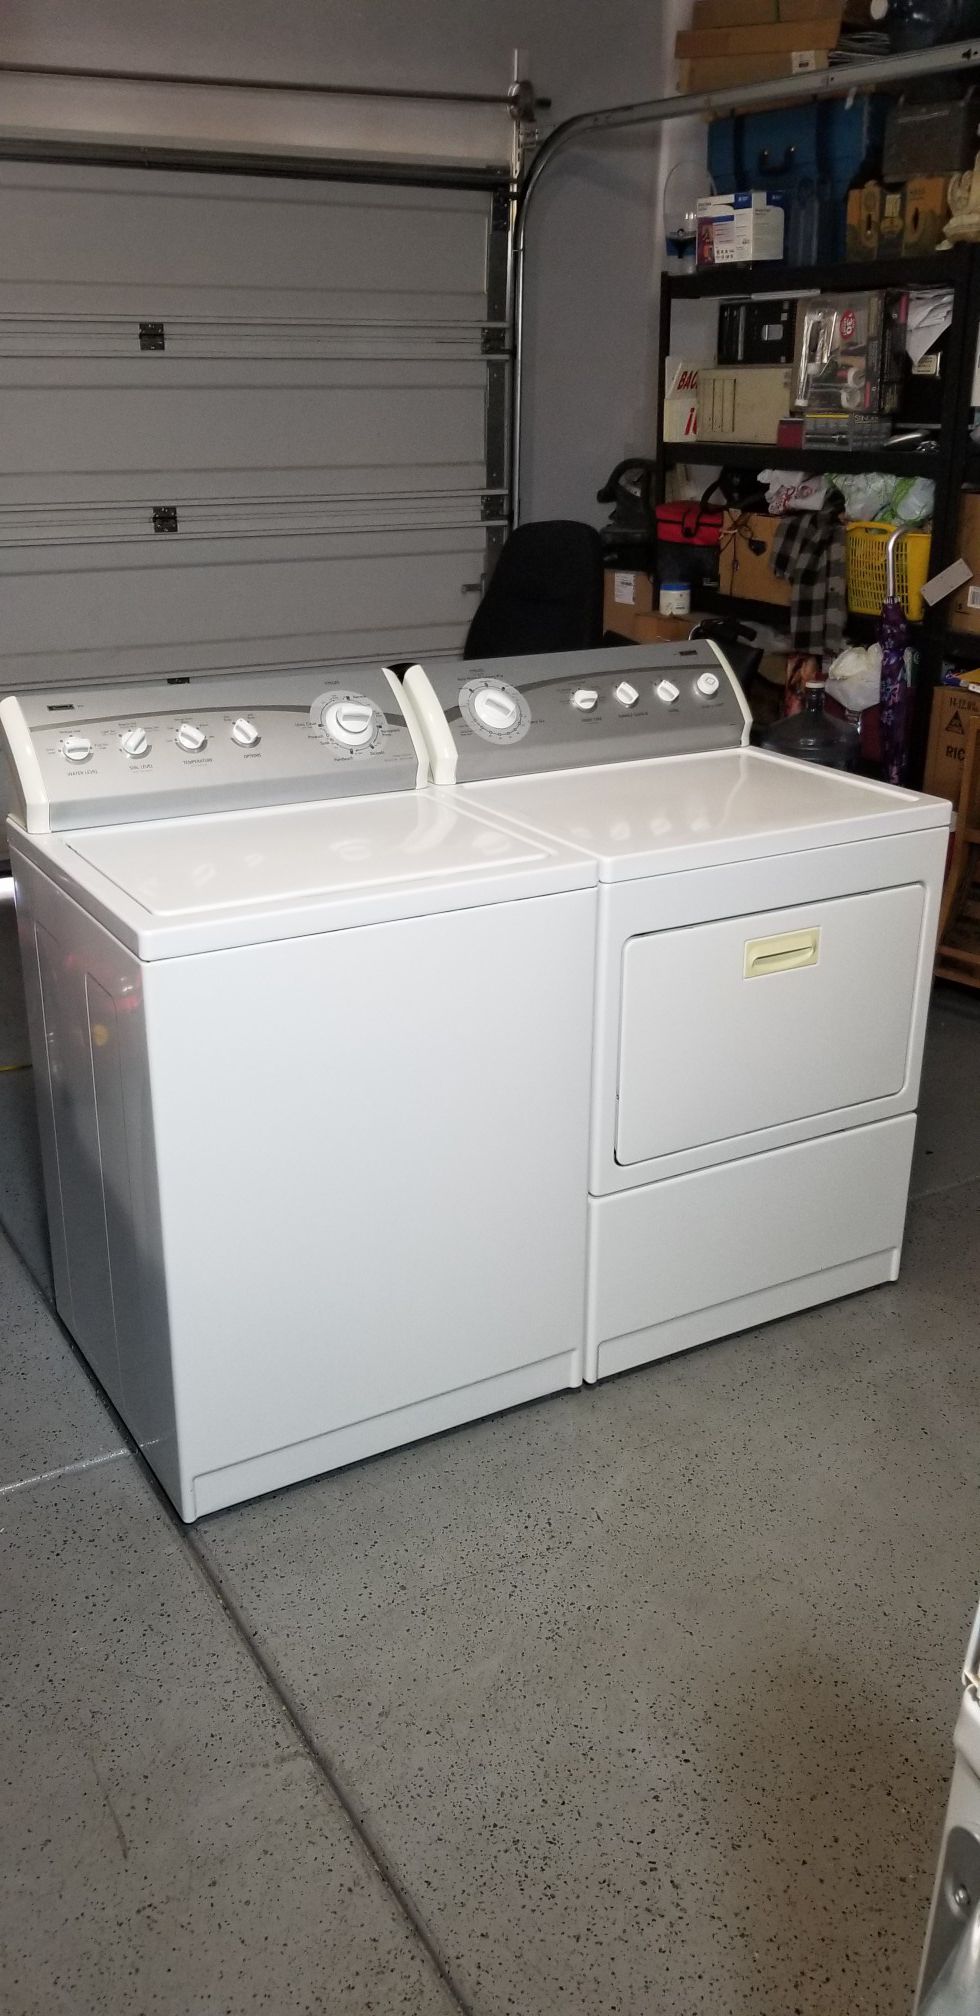 Kenmore 800 Series Washer And Gas Dryer